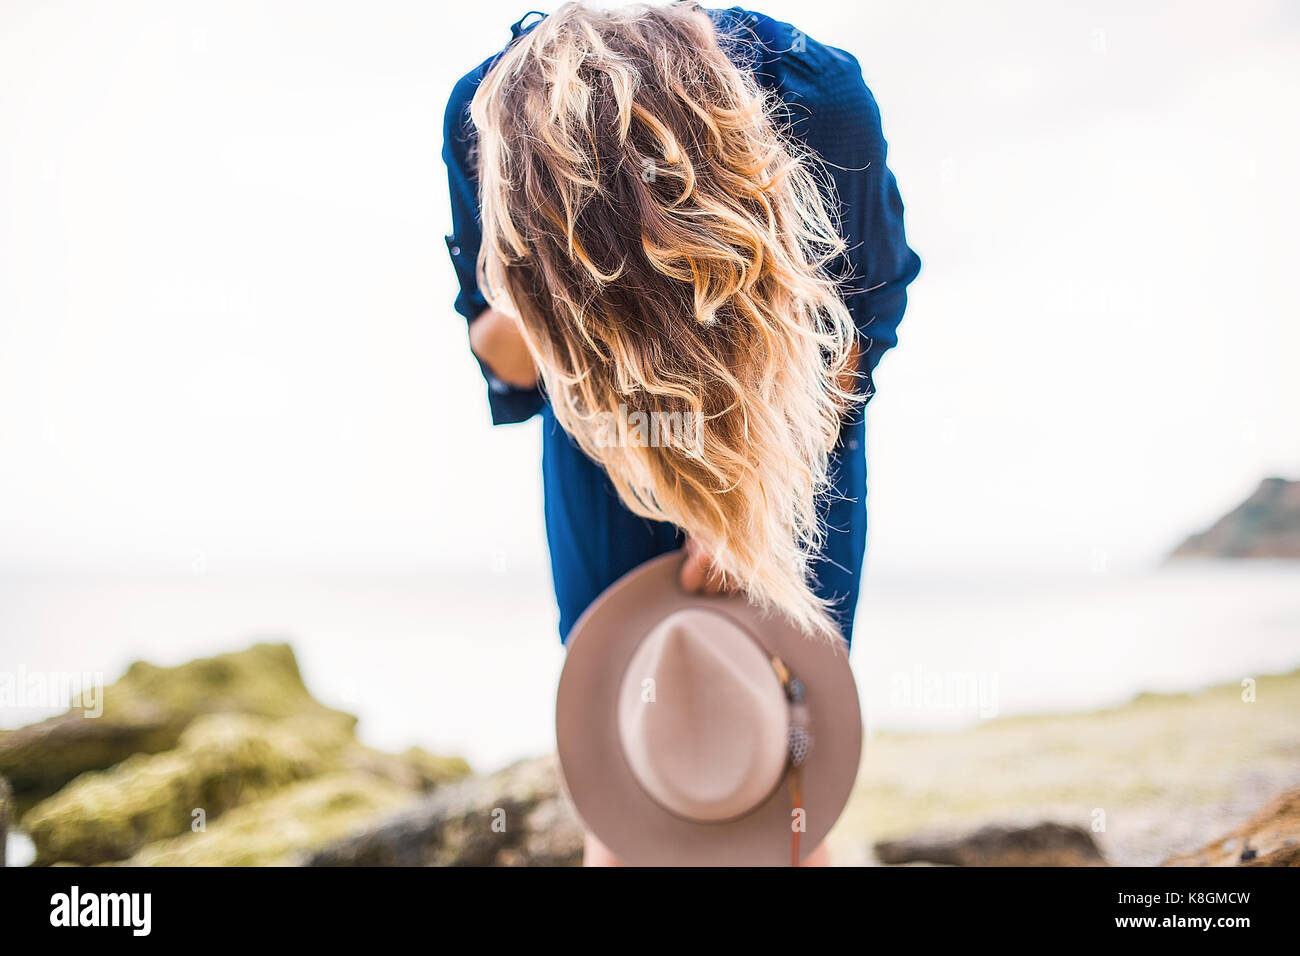 Mid adult woman in coastal setting, holding hat, bending over, hair covering face Stock Photo